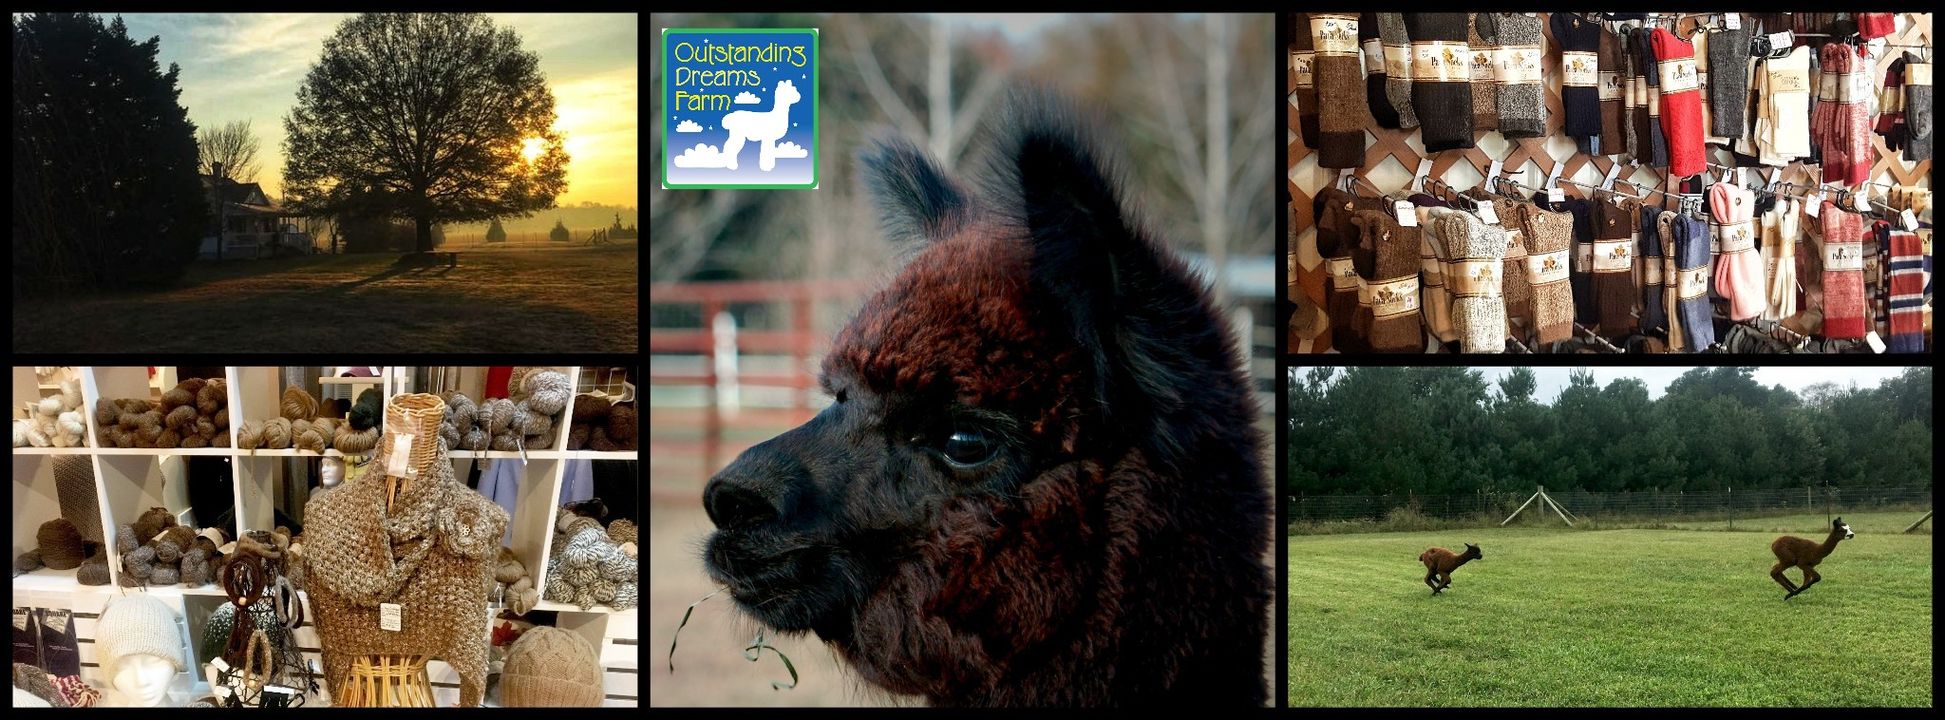 Camper submitted image from Outstanding Dreams Alpaca Farm - 1